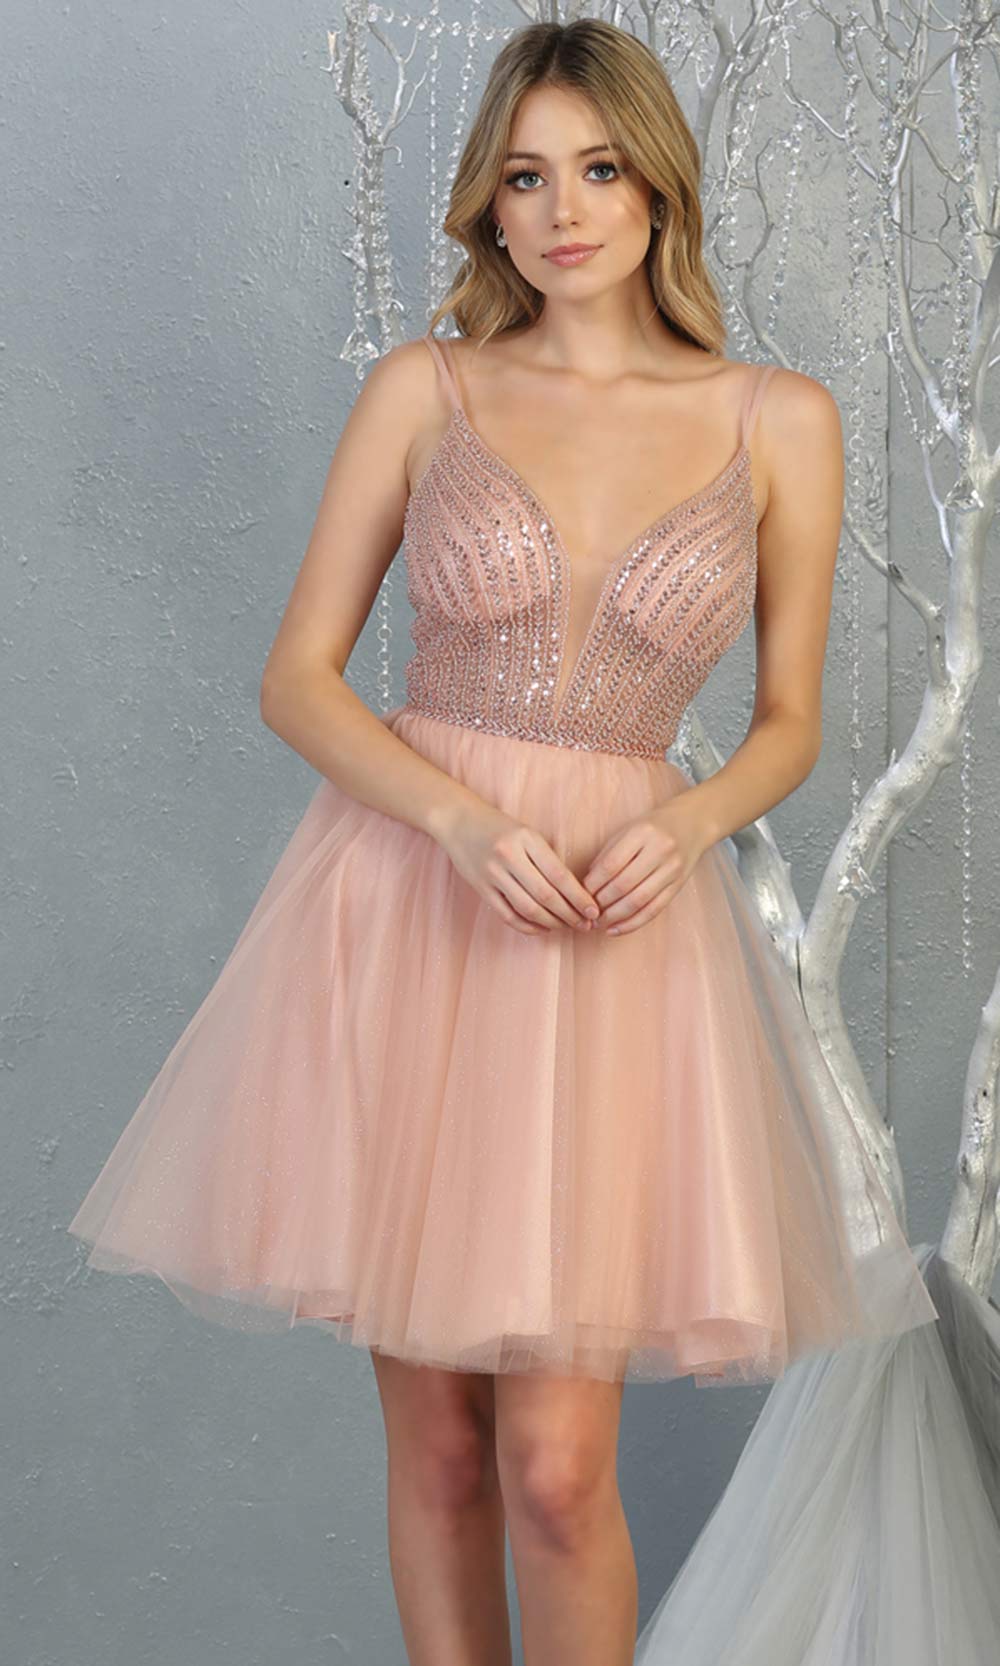 Mayqueen MQ1800 short blush pink sequin flowy vneck grade 8 graduation dress w/ straps & puffy skirt. Light pink party dress is perfect for prom, graduation, grade 8 grad, confirmation dress, bat mitzvah dress, damas. Plus sizes avail for grad dress.jpggrade 8 grad dresses, graduation dresses